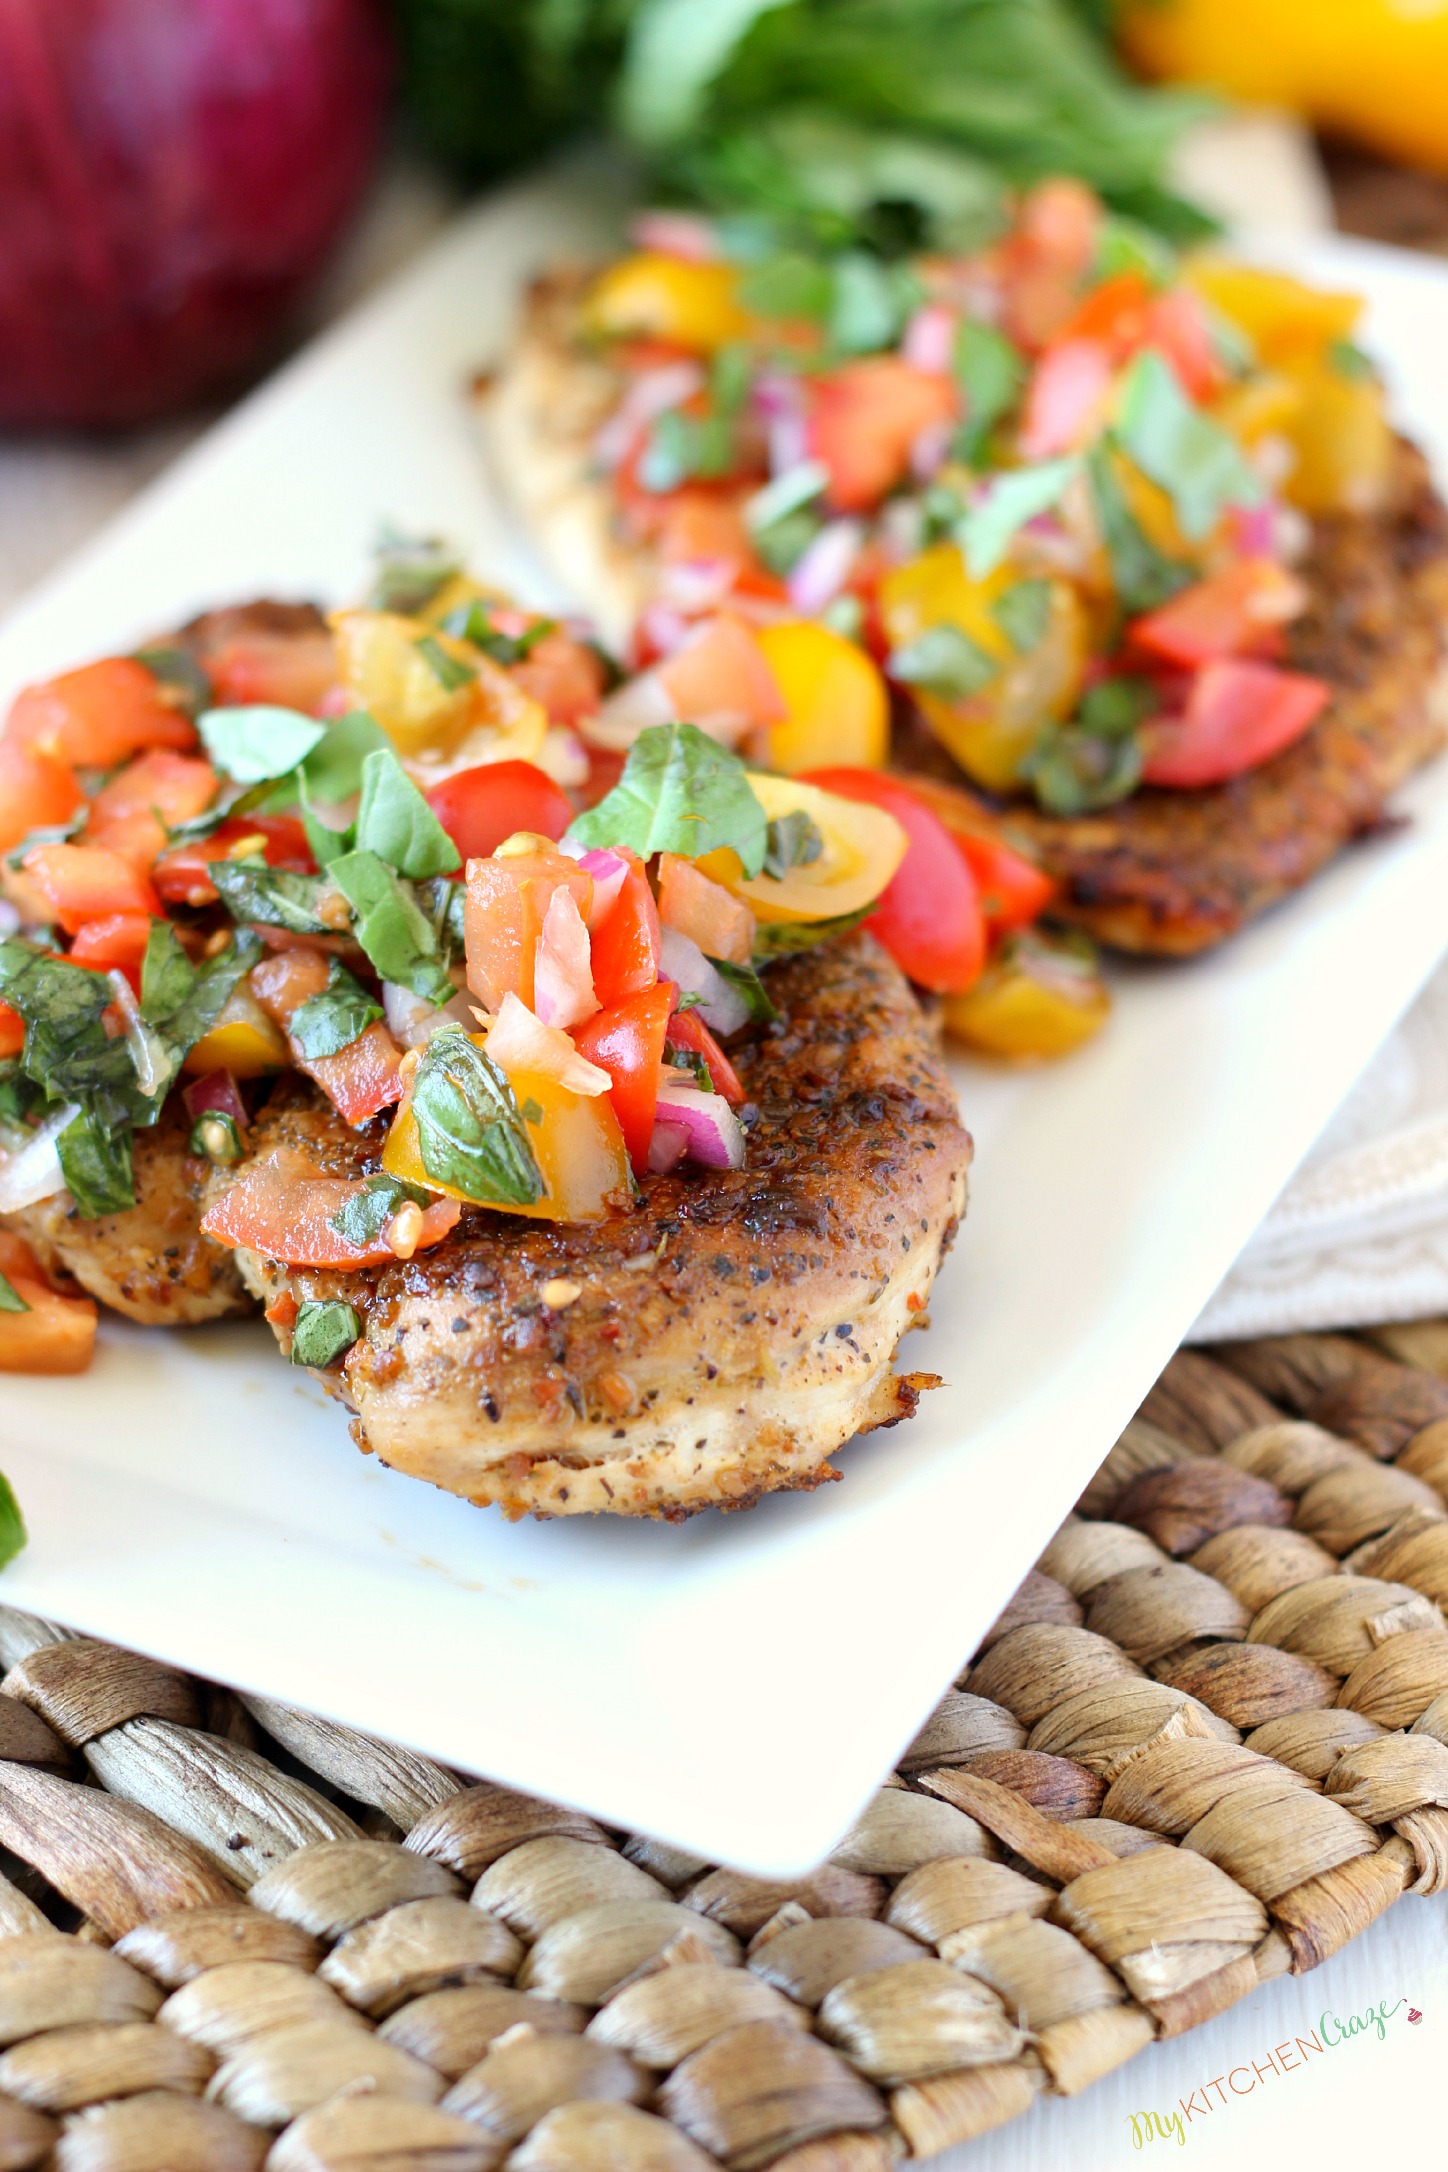 Bruschetta Chicken ~ mykitchencraze.com ~ A delicious and flavorful meal that the whole family will love.